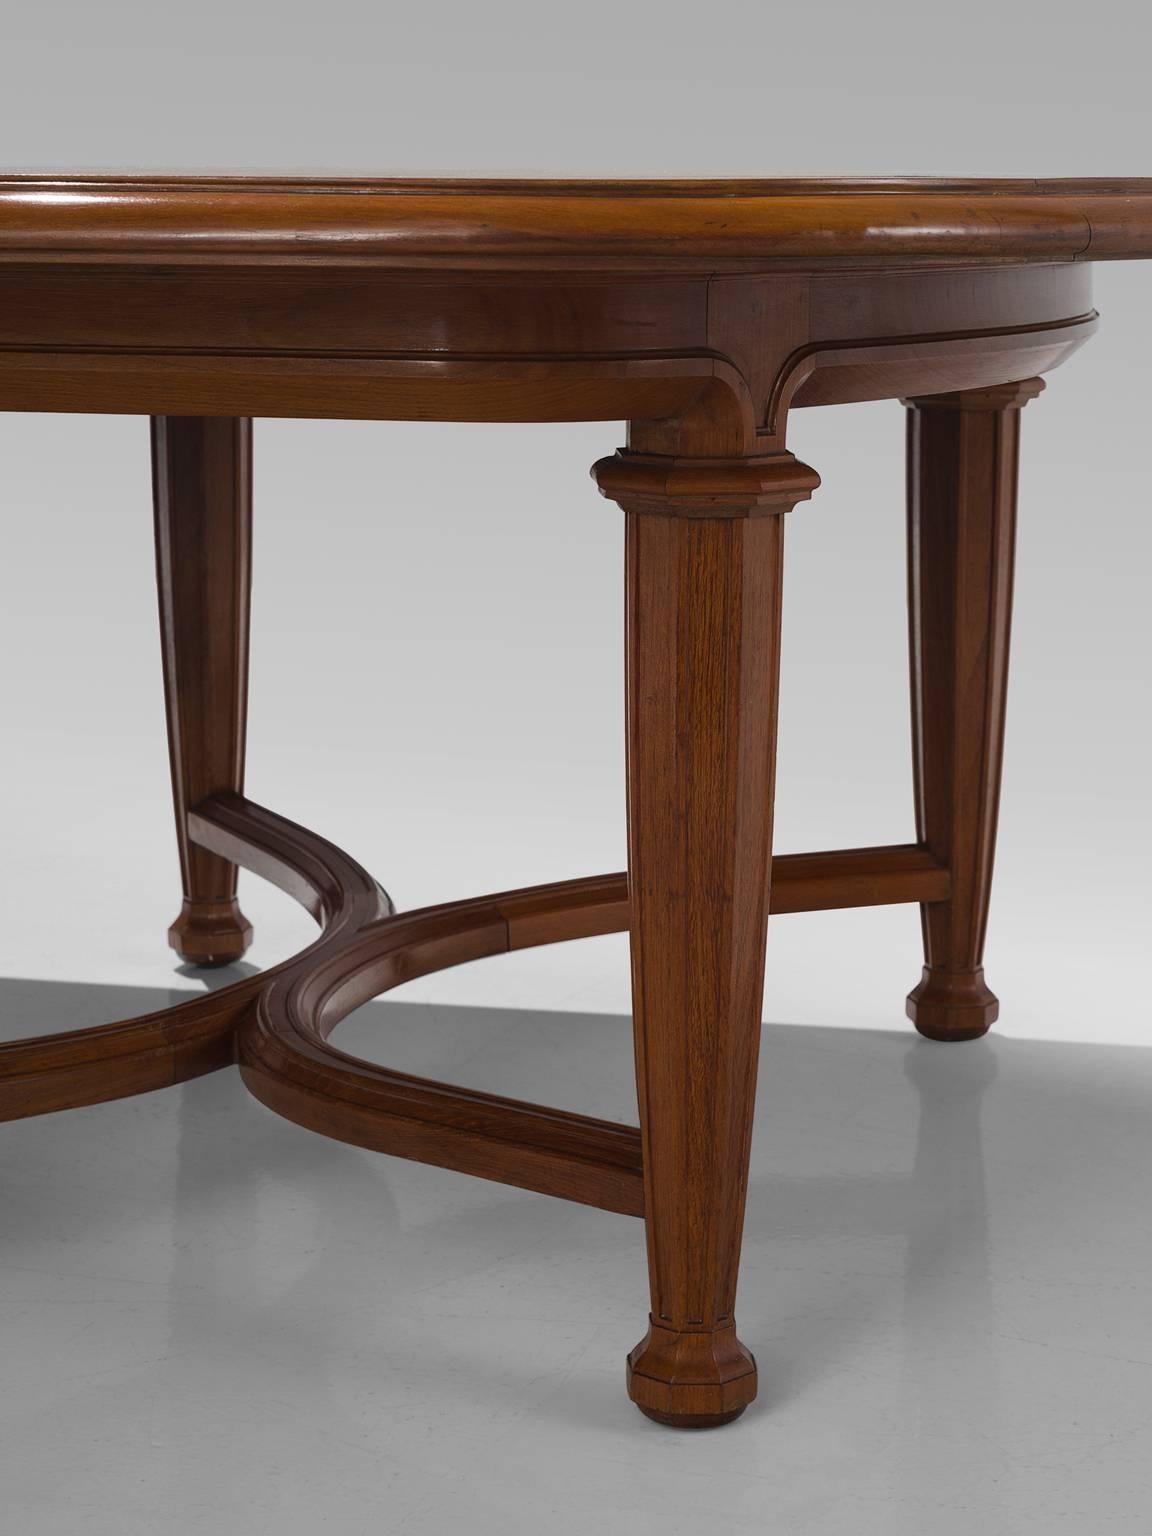 Early 20th Century Extra Large 675cm/265in Oak Conference Table, c. 1925